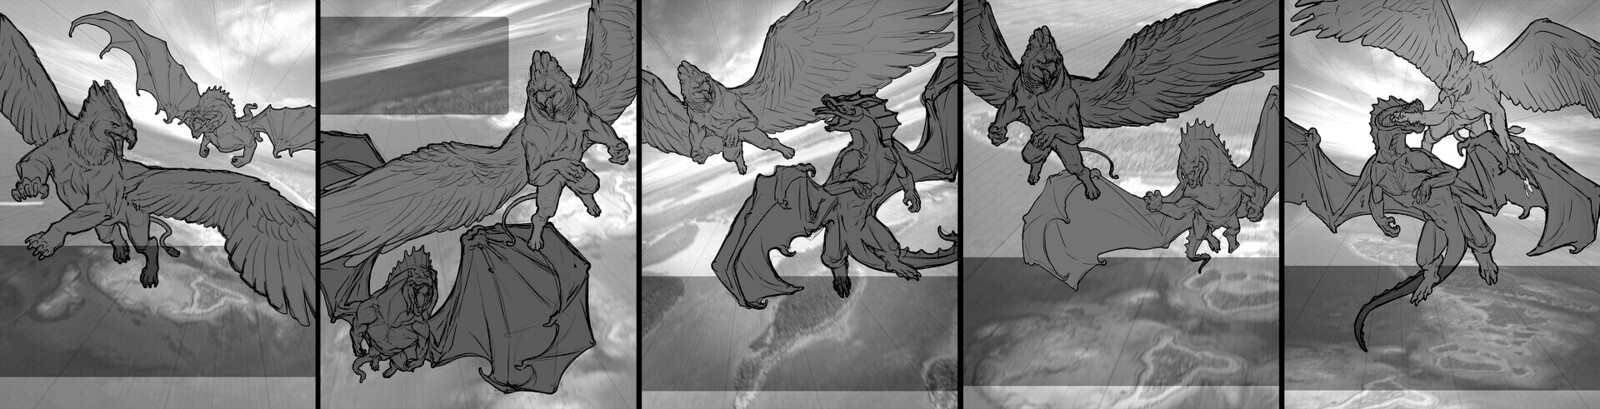 Griffin and Dragon Chase Concepts